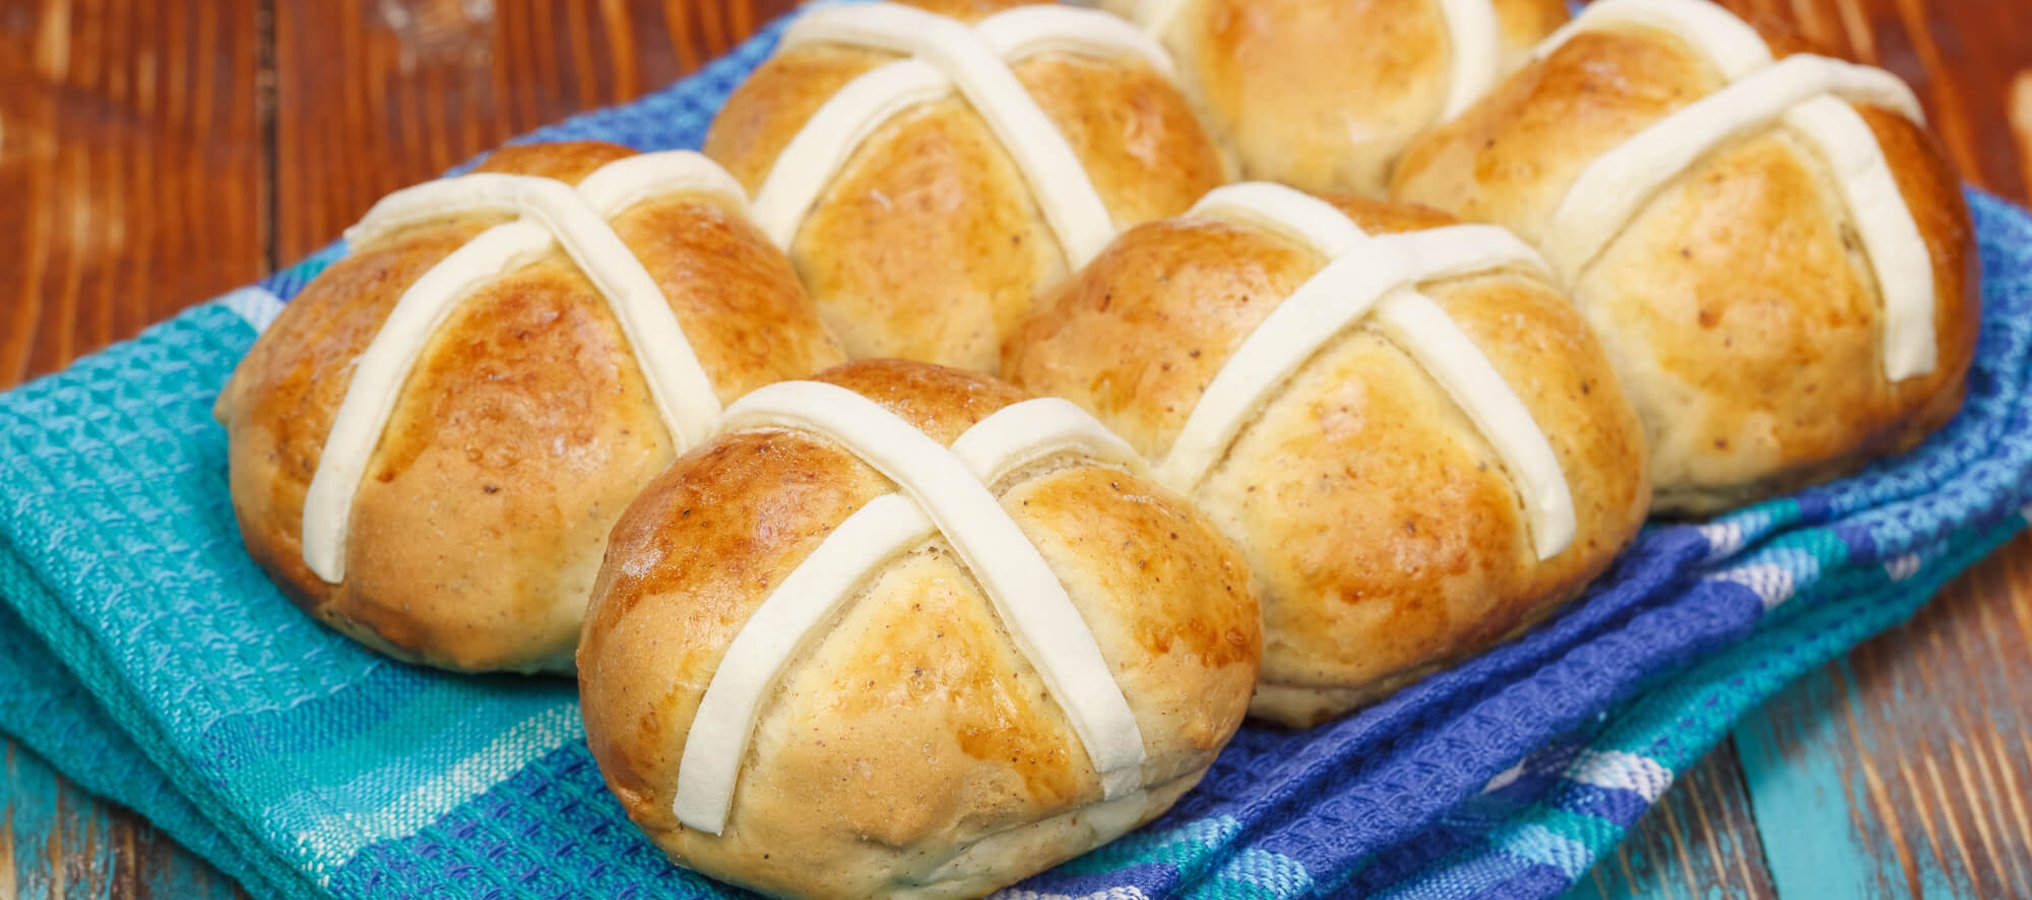 Hot Cross Bun Day (11th September) Days Of The Year